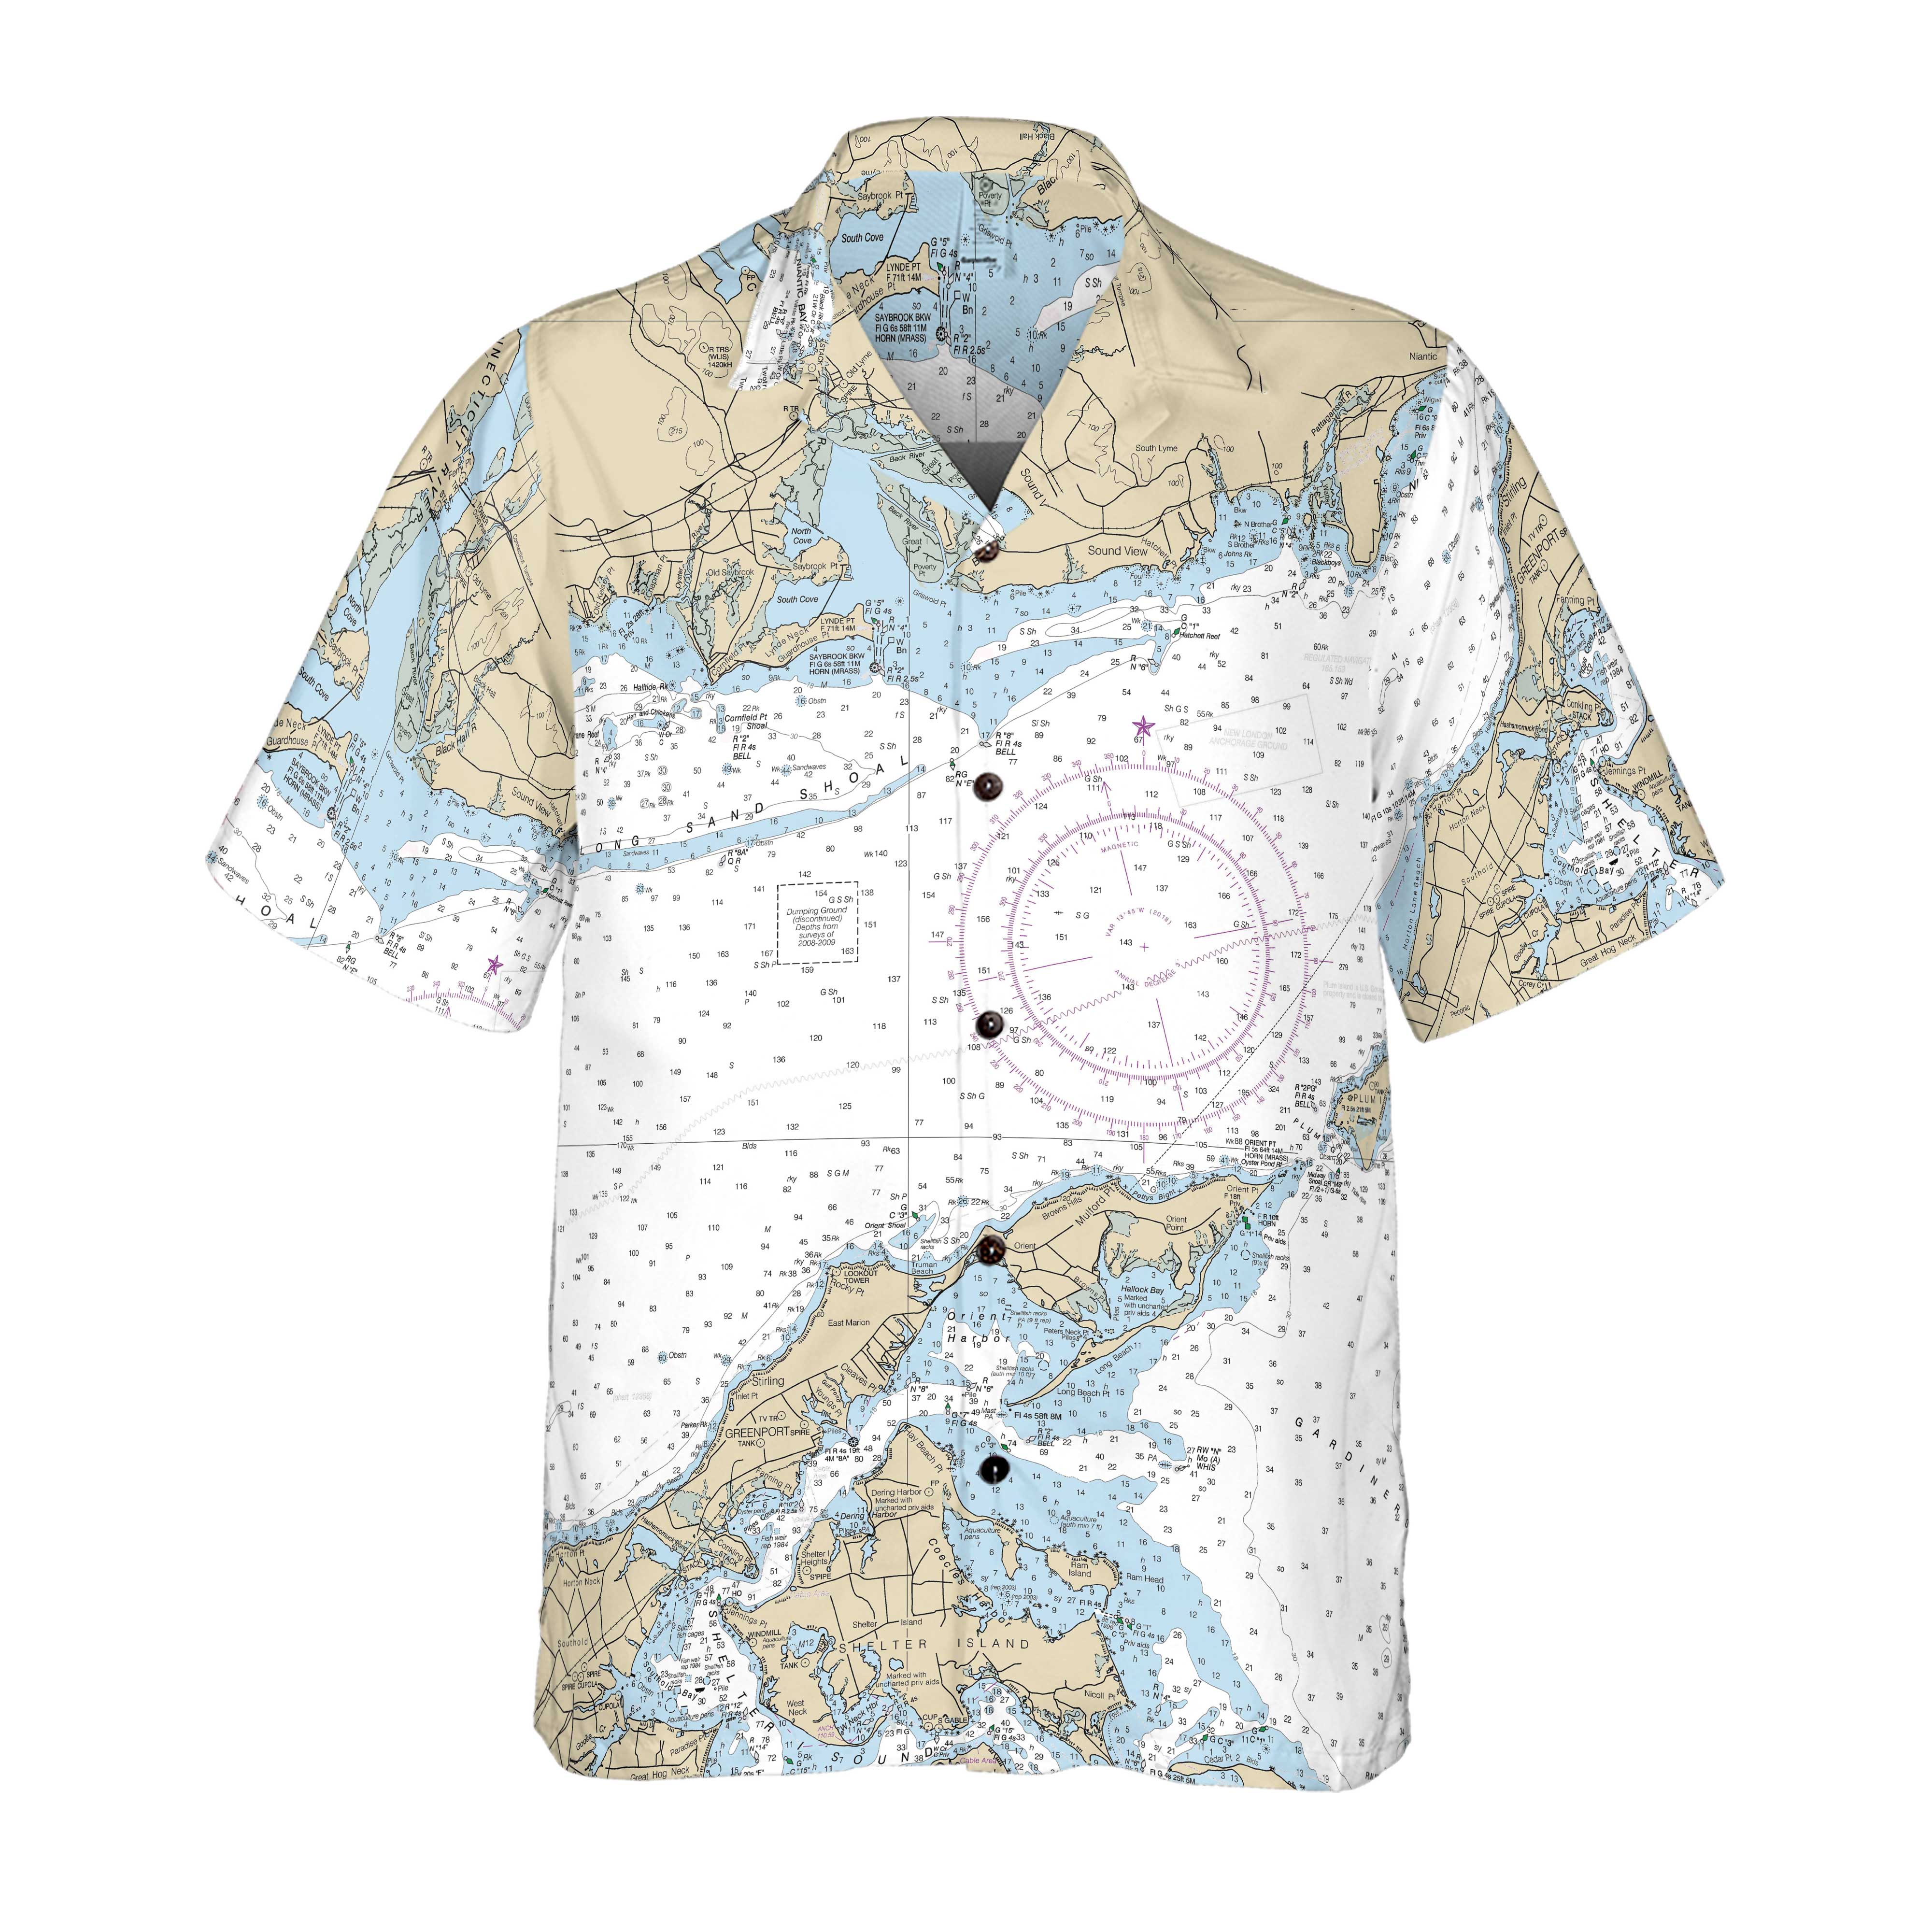 The Old Saybrook to Greenport Coconut Button Camp Shirt